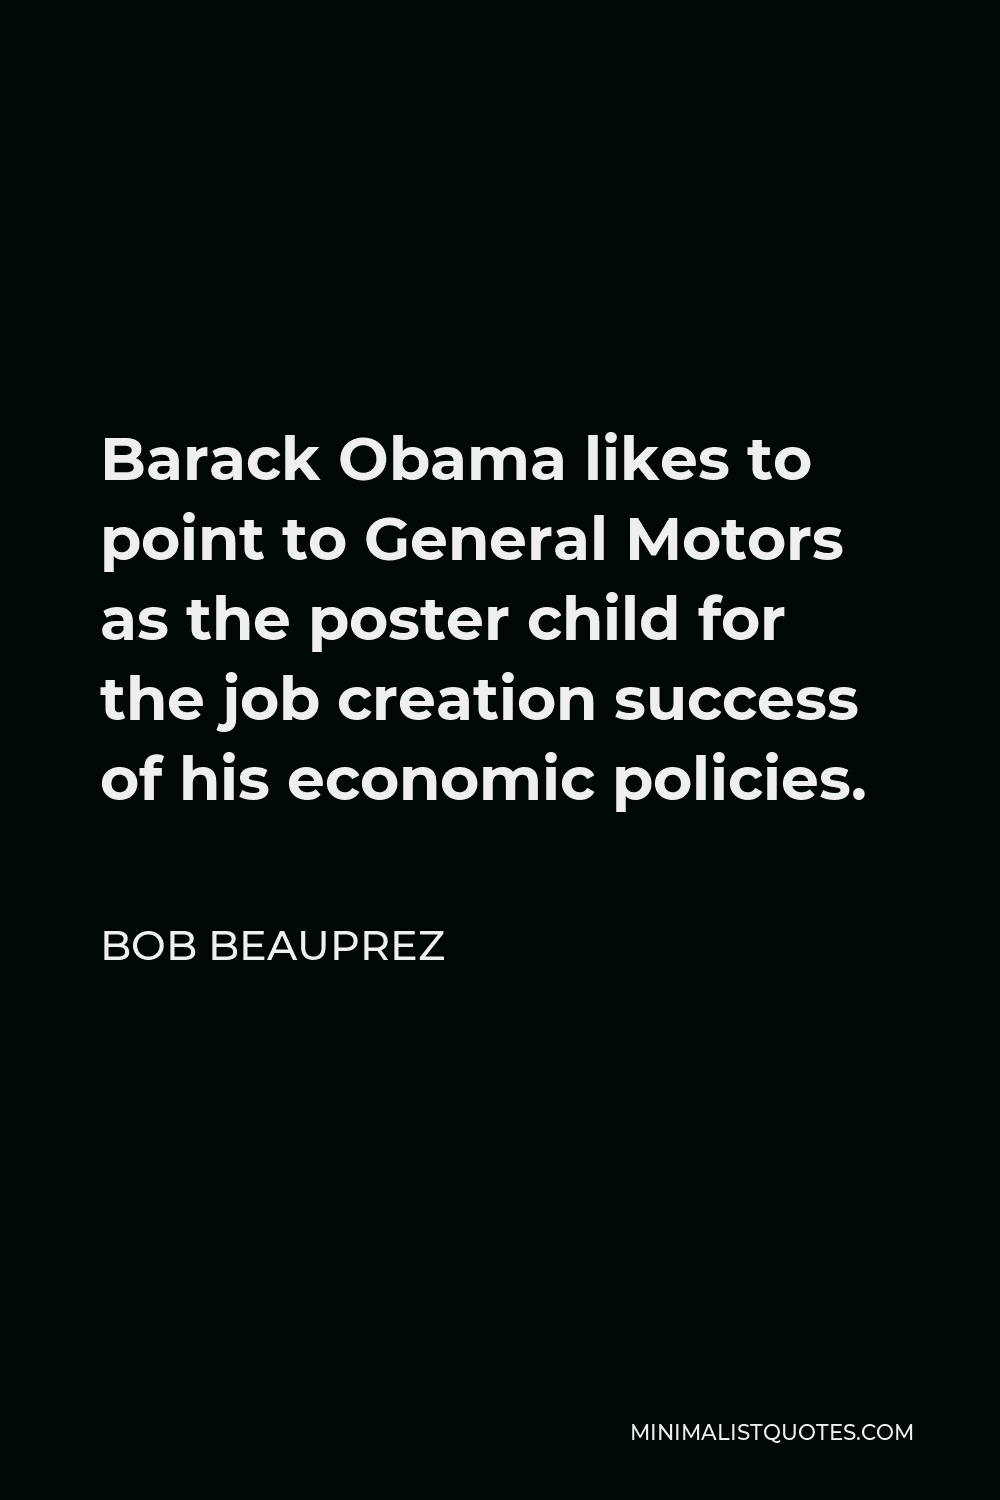 Bob Beauprez Quote - Barack Obama likes to point to General Motors as the poster child for the job creation success of his economic policies.